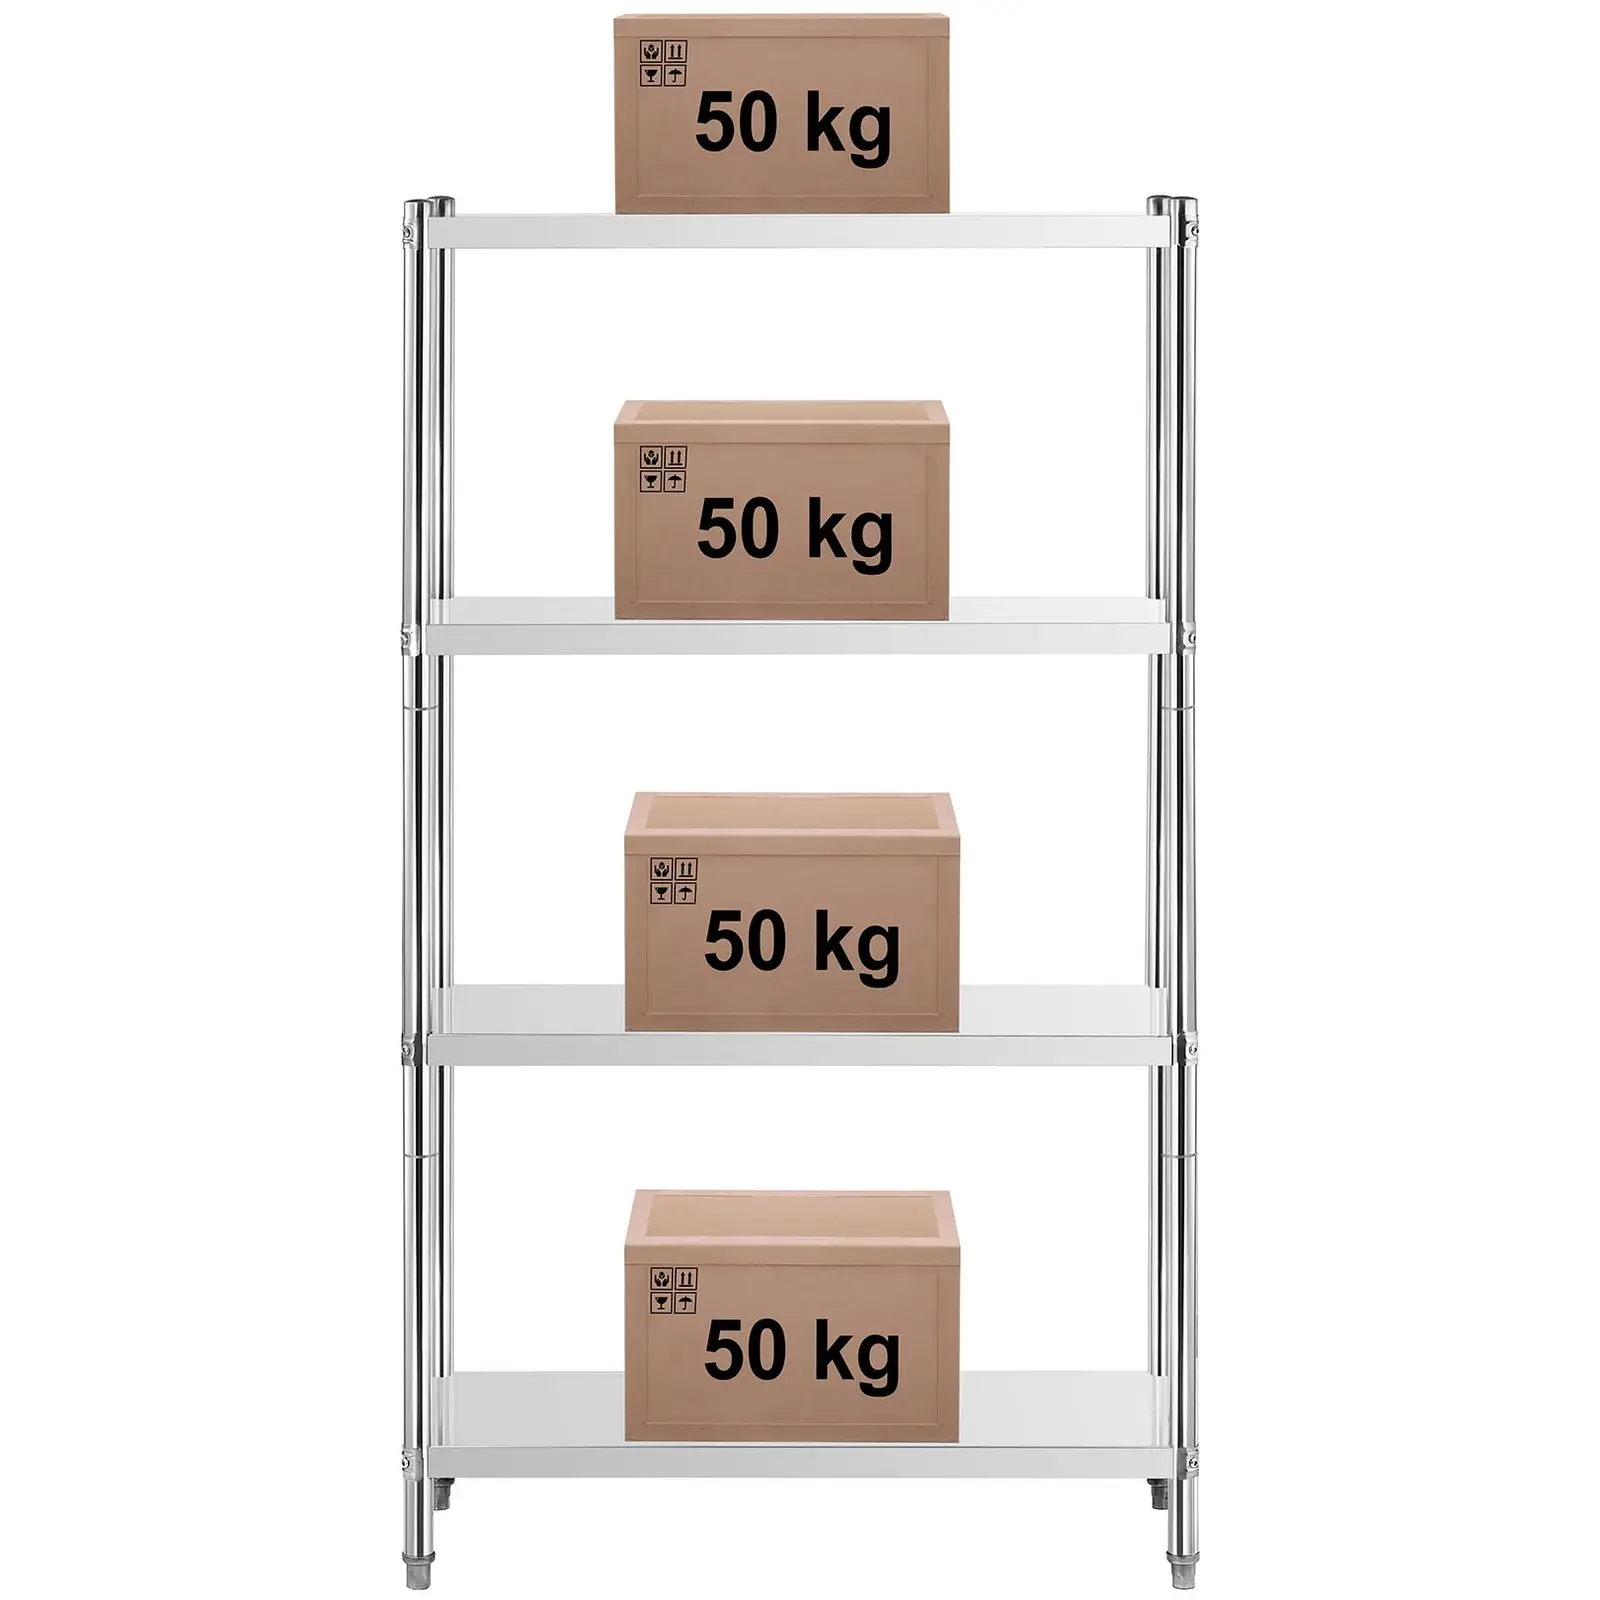 Metal Shelving Unit - 90 x 60 x 180 (LxWxH) cm - Royal Catering - 200 kg - Stainless steel